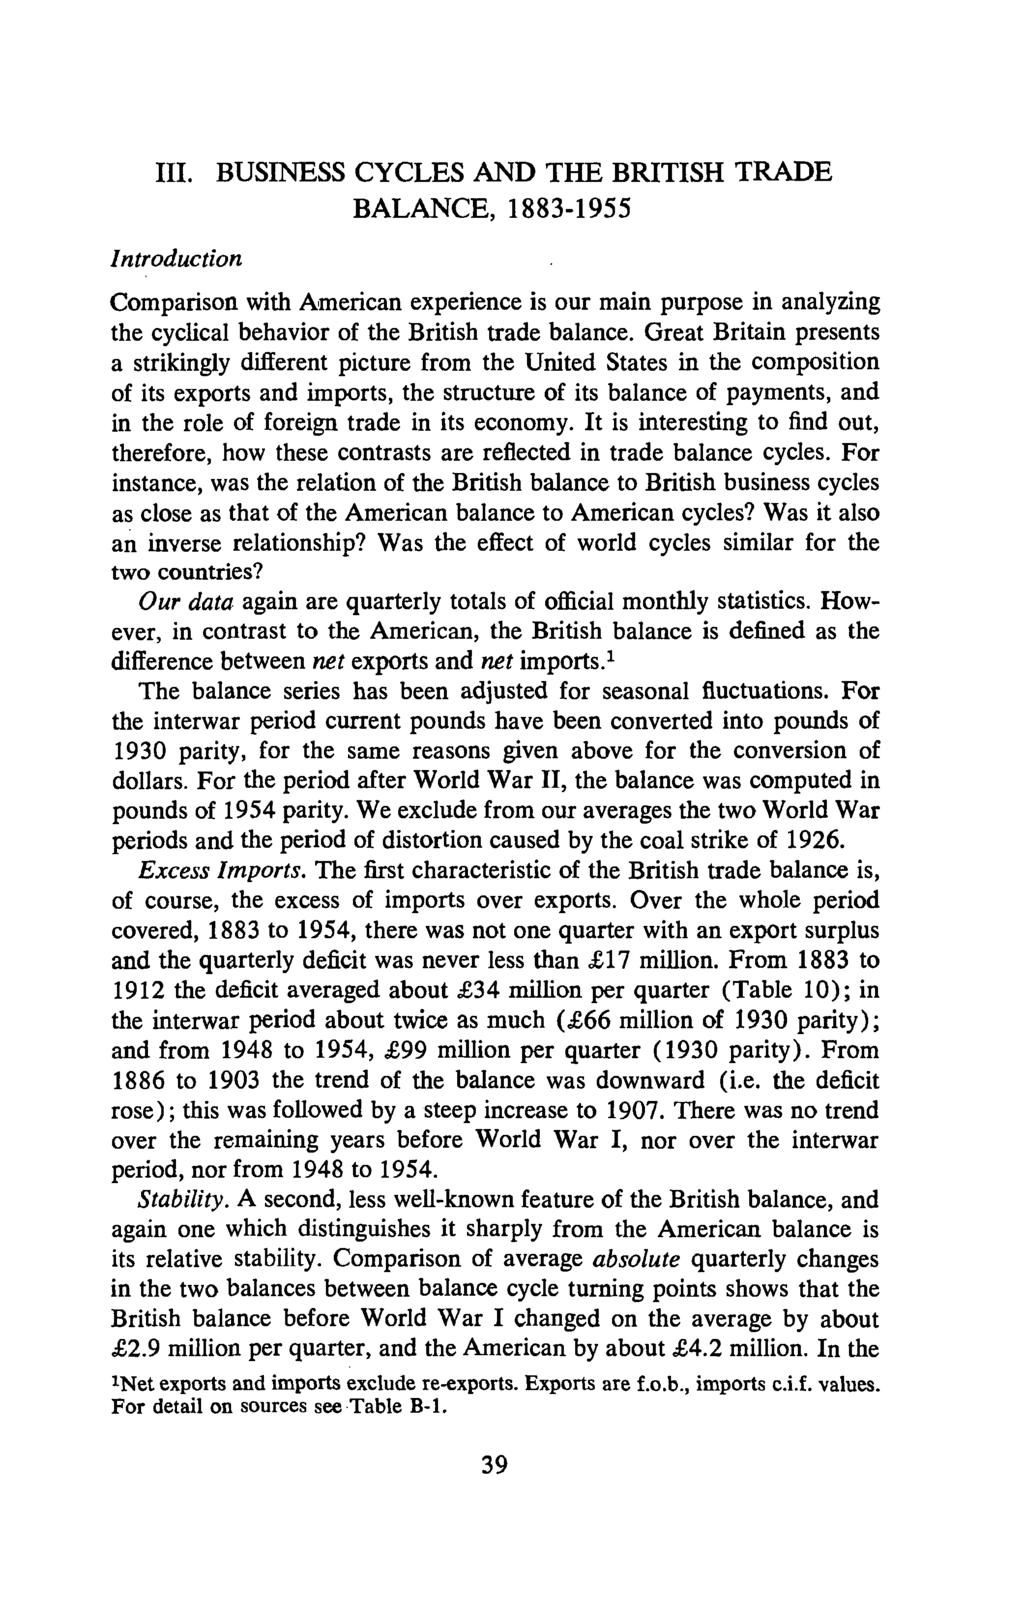 III. BUSINESS CYCLES AND THE BRITISH TRADE BALANCE, 1883-1955 Introduction Comparison with American experience is our main purpose in analyzing the cyclical behavior of the British trade balance.